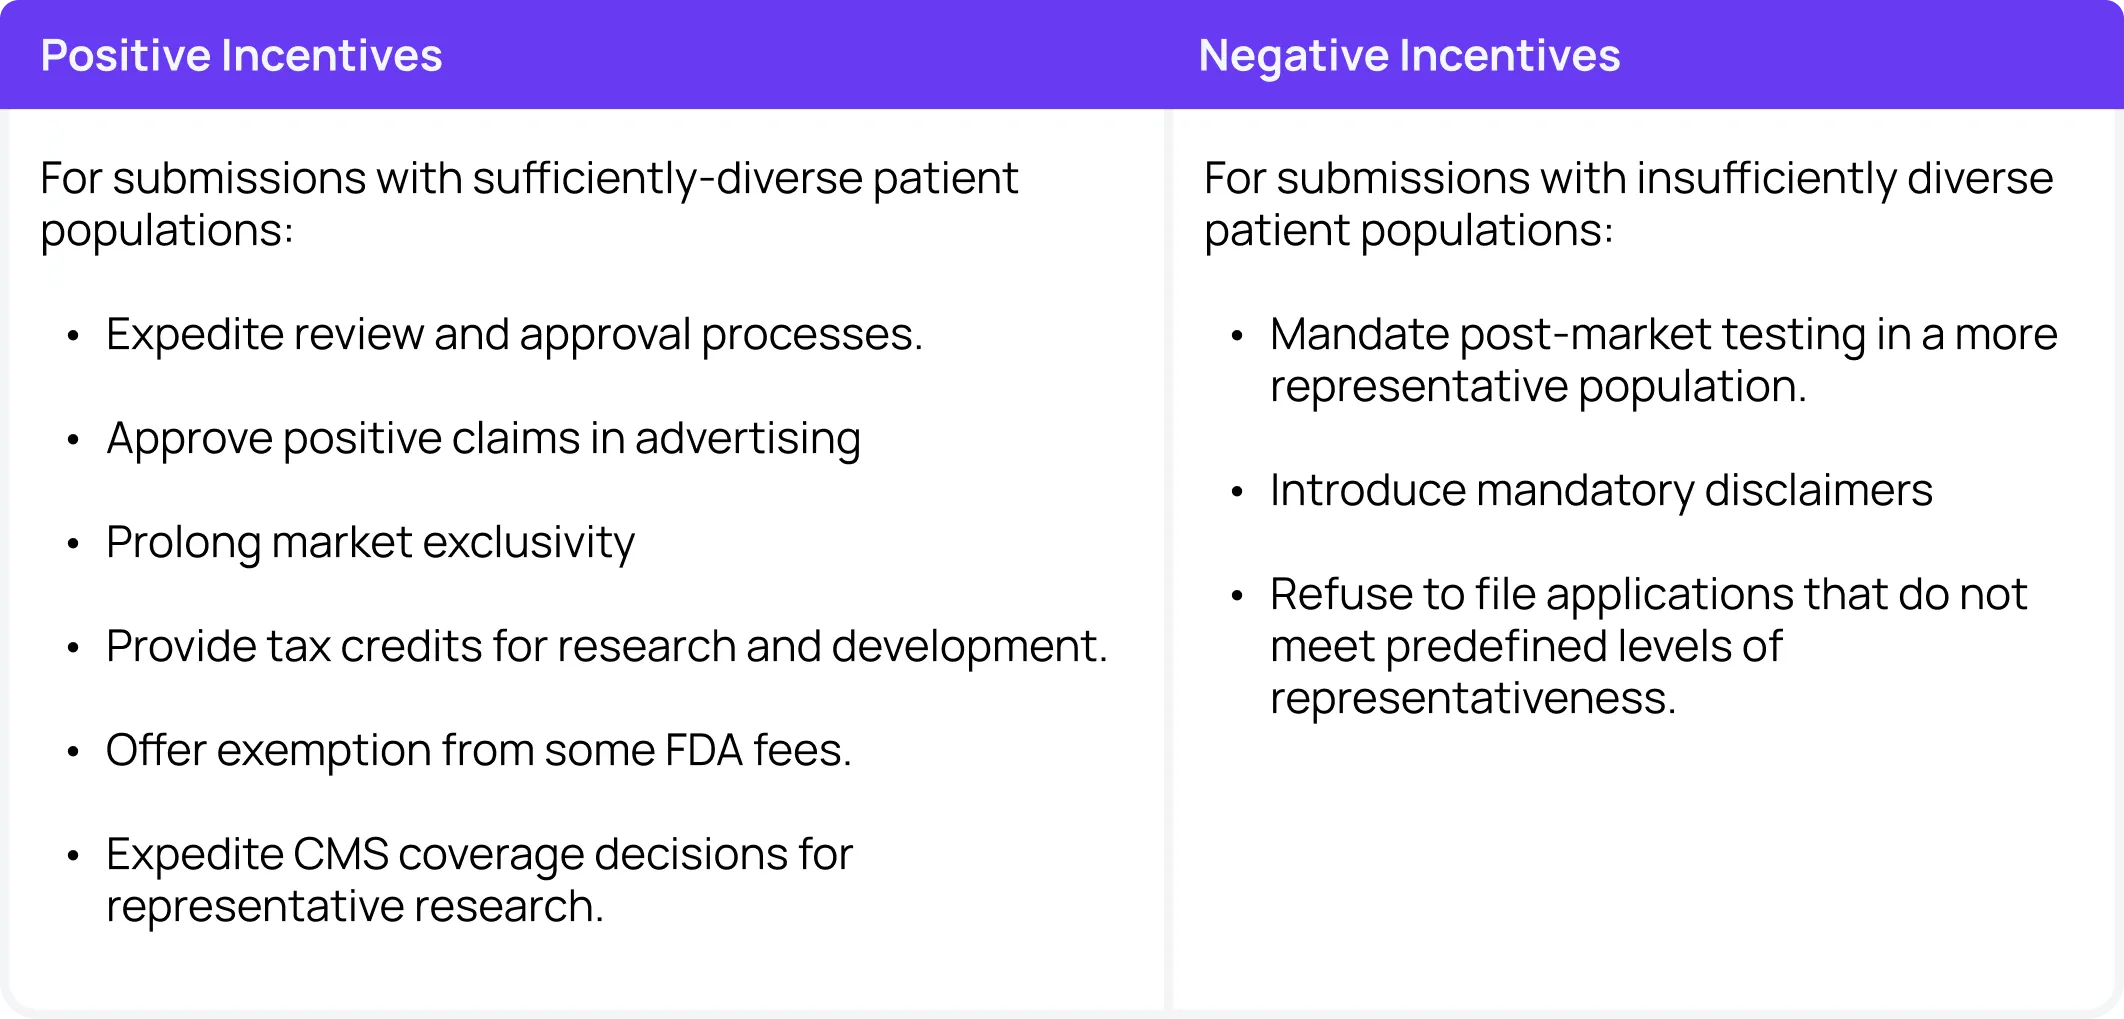 Table showing positive and negative incentives for diversity in clinical research